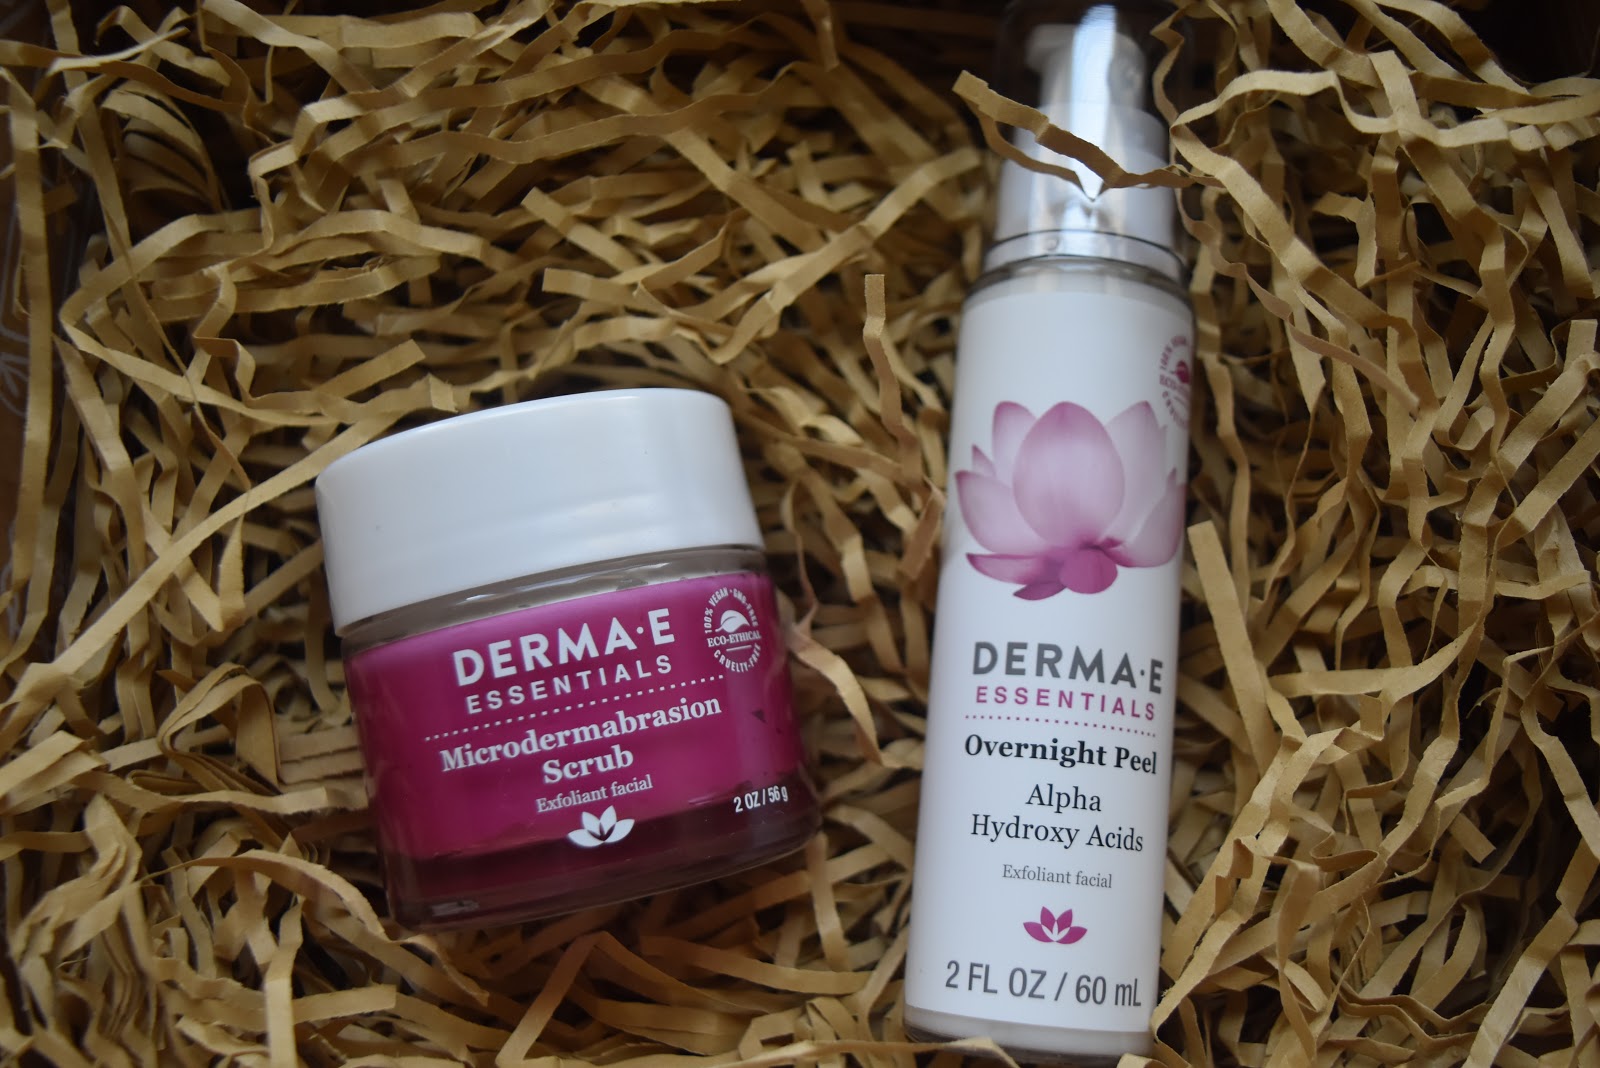 Tips on Reversing Skin Damage Using These Products from DERMA-E